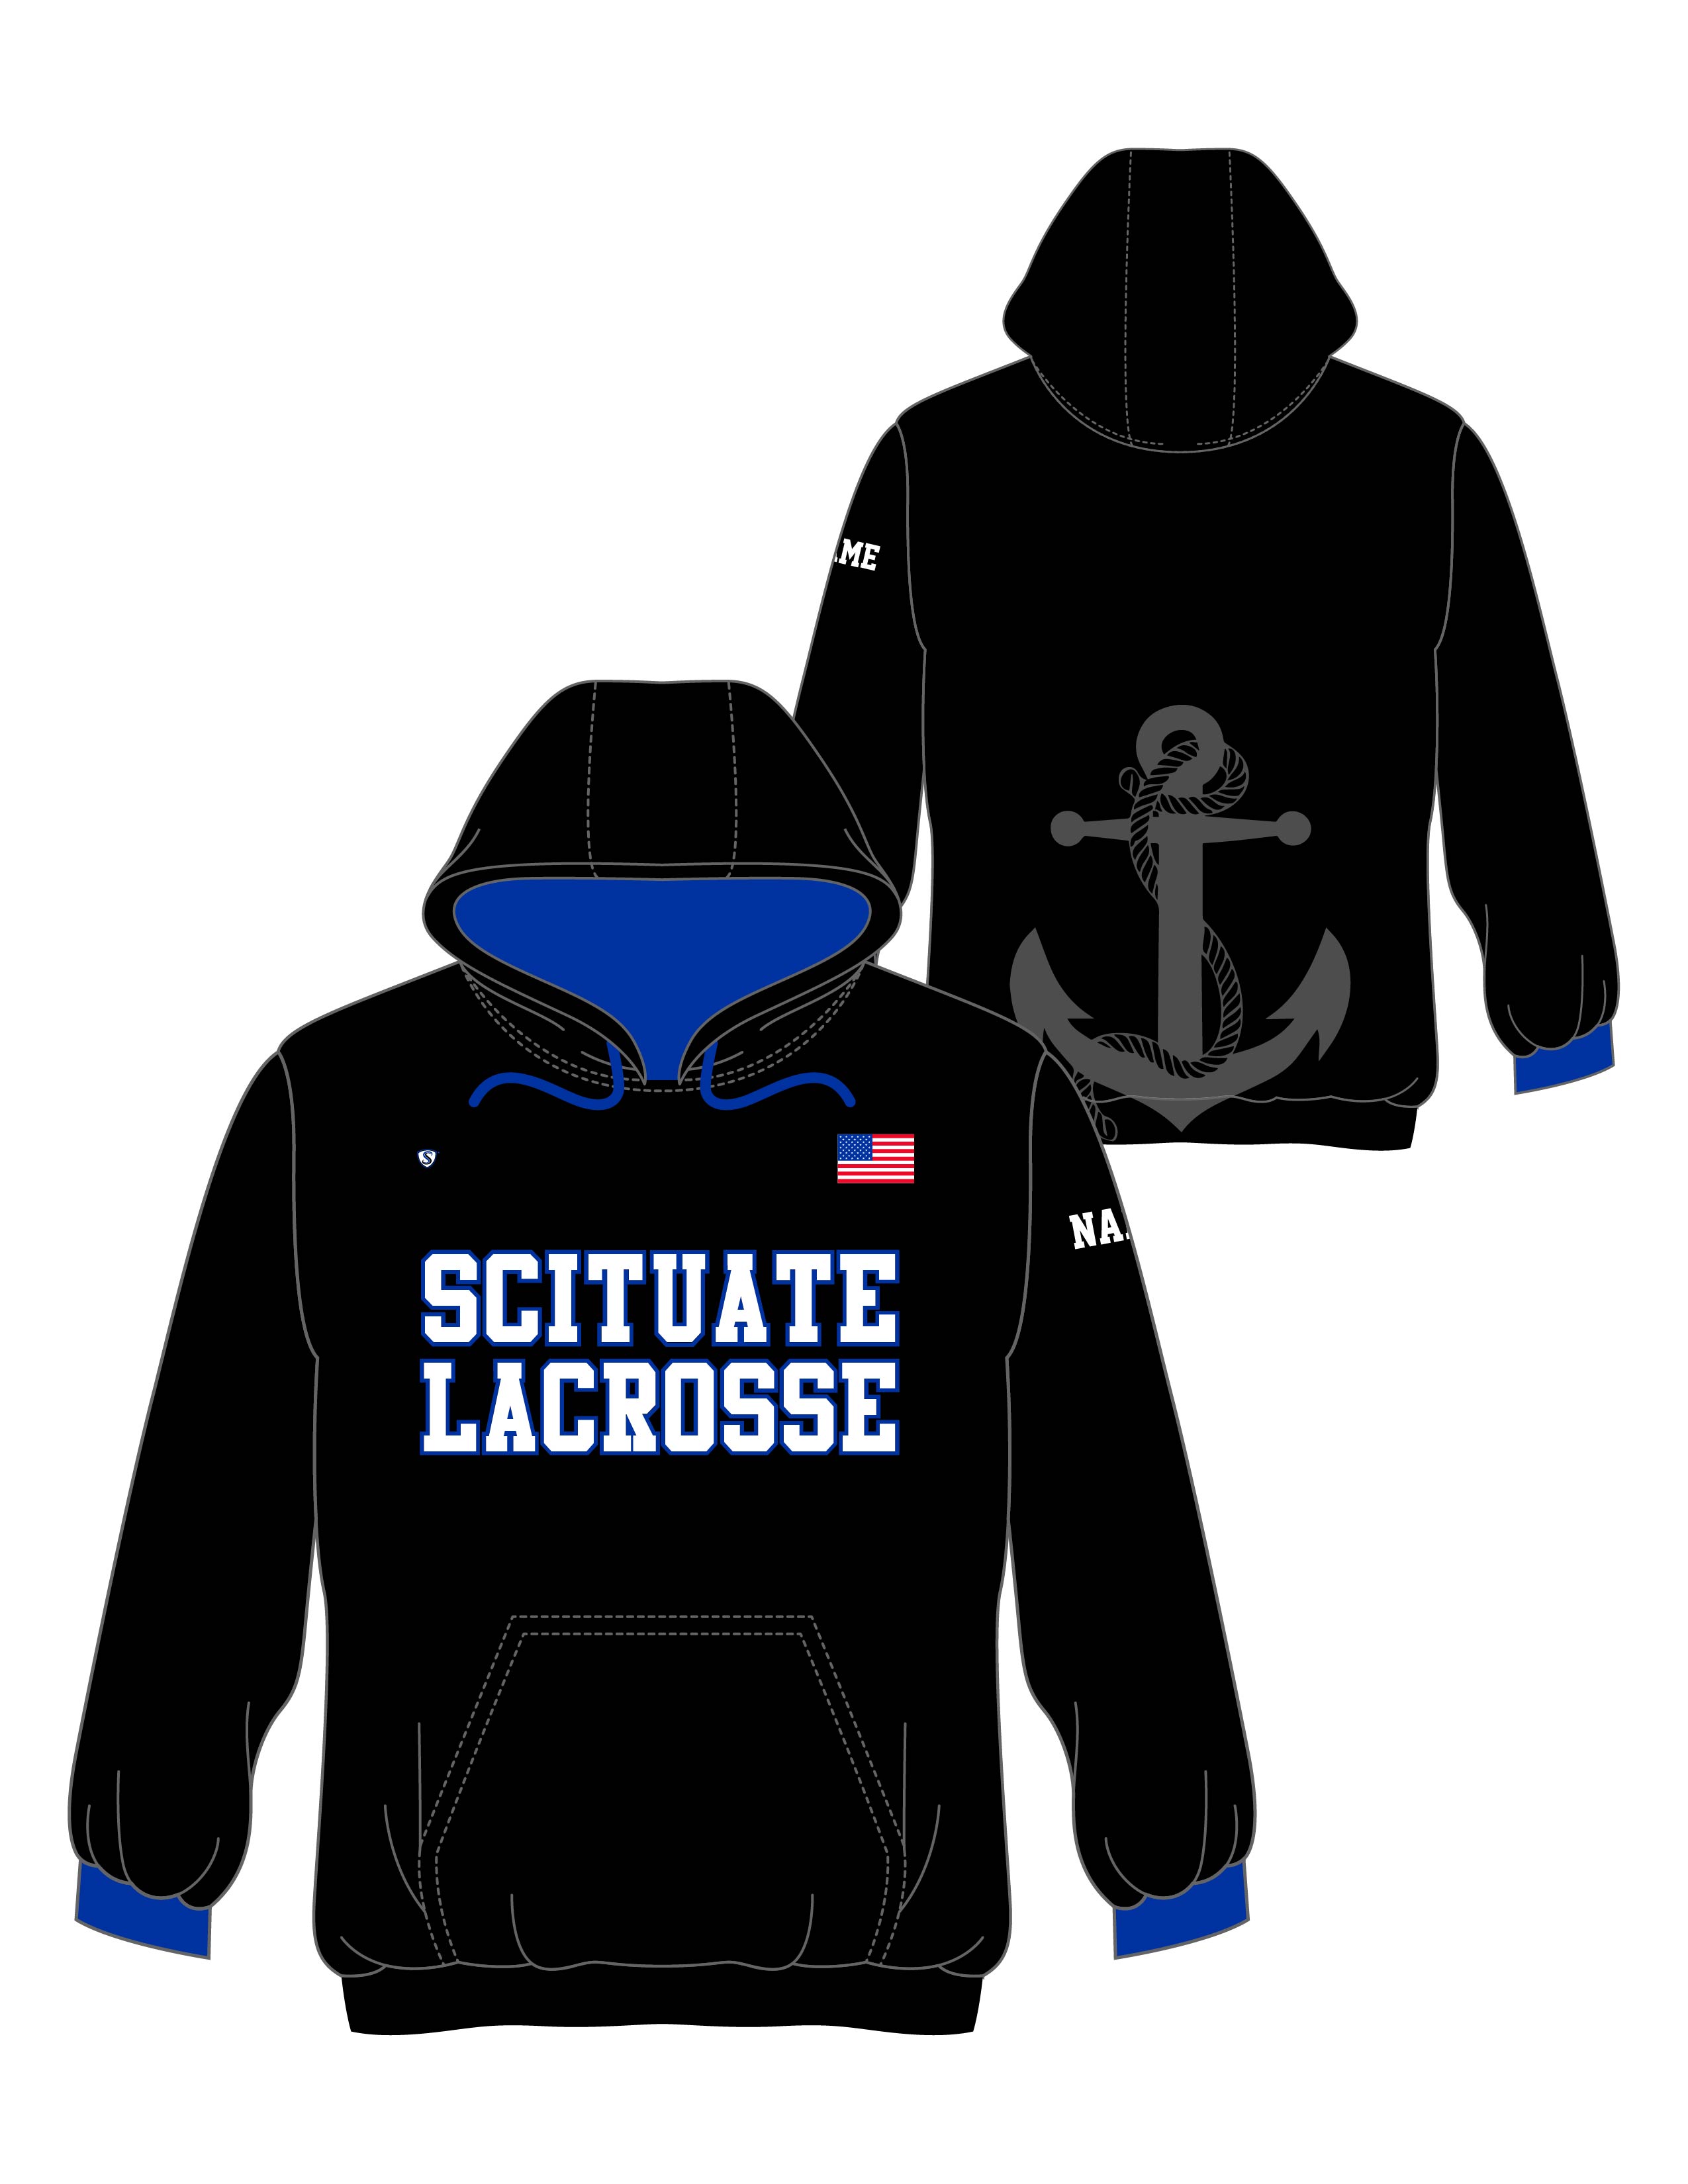 Custom Sublimated Hoodie - Scituate